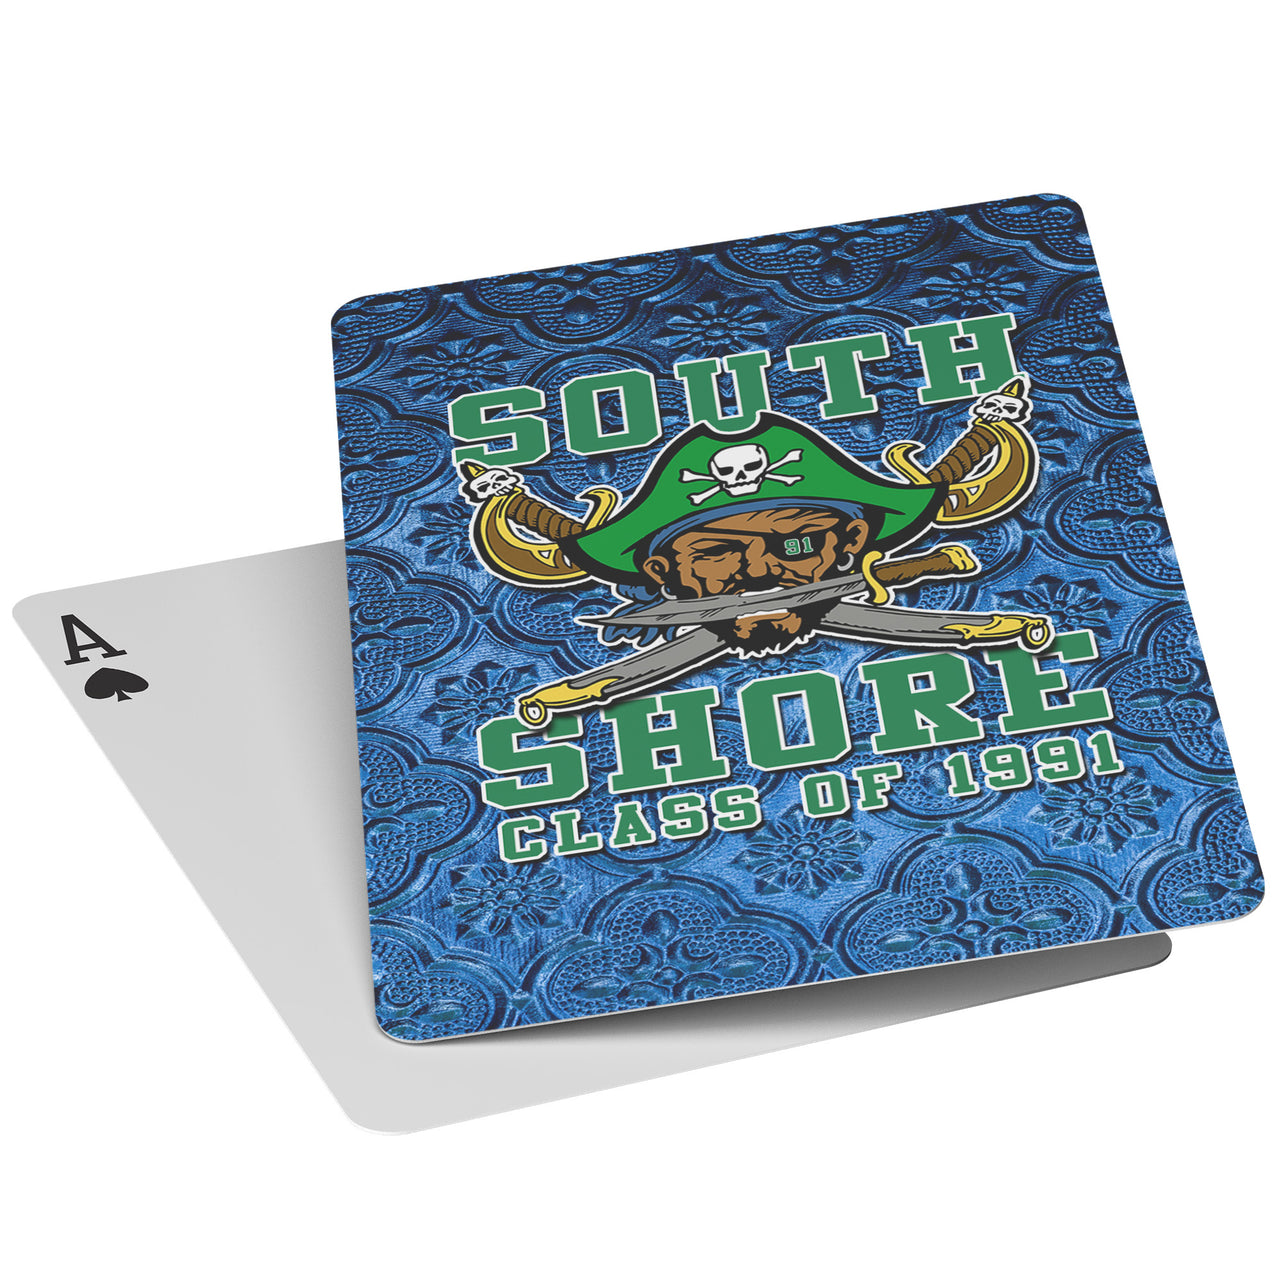 South Shore c/o 91 Playing Cards